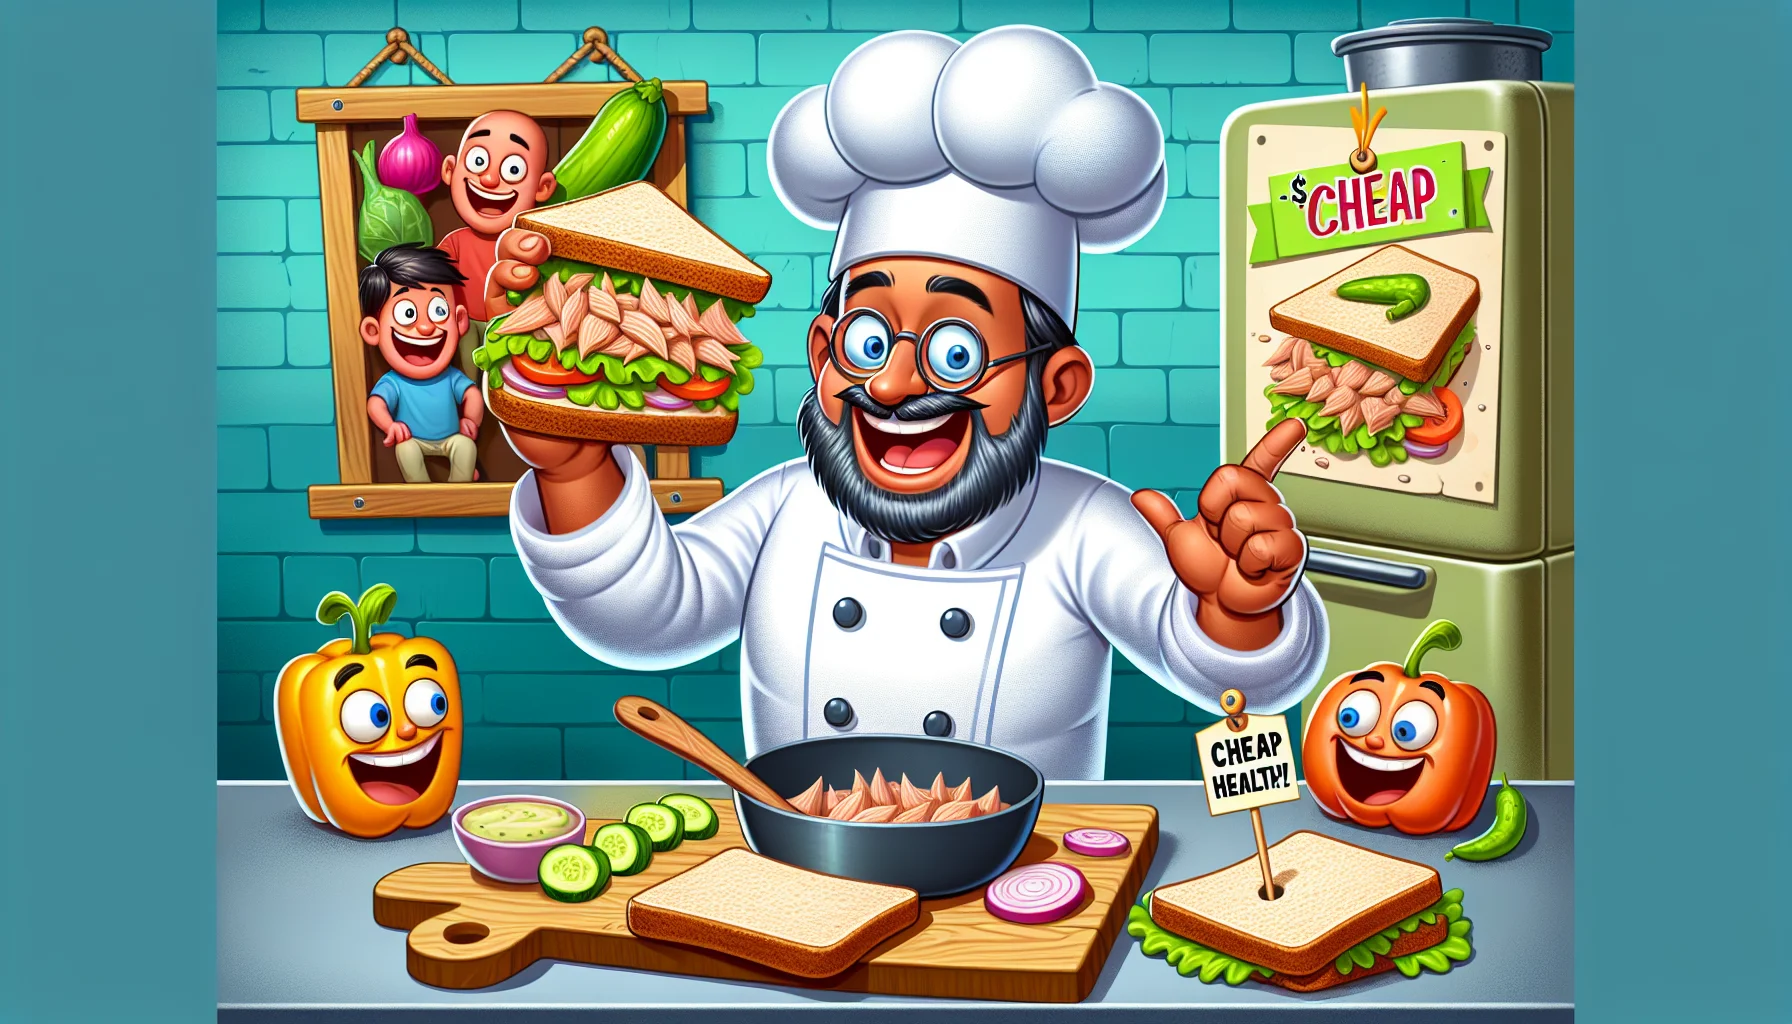 Create a vibrant, cartoonish image that humorously depicts the process of making a tuna sandwich for a cheap, healthy meal. Have an enthusiastic South Asian man wearing chef's attire as the main character. Show him in his cartoon-style kitchen, preparing the sandwich with exaggerated proportions of tuna, lettuce, chopped vegetables, and slices of whole grain bread. Nearby, make sure to place a small tag revealing the surprisingly low cost of the ingredients. Lastly, include an audience of various cartoon vegetables and bread slices watching the process with wide eyes and smiles, promoting the fun of healthy eating.